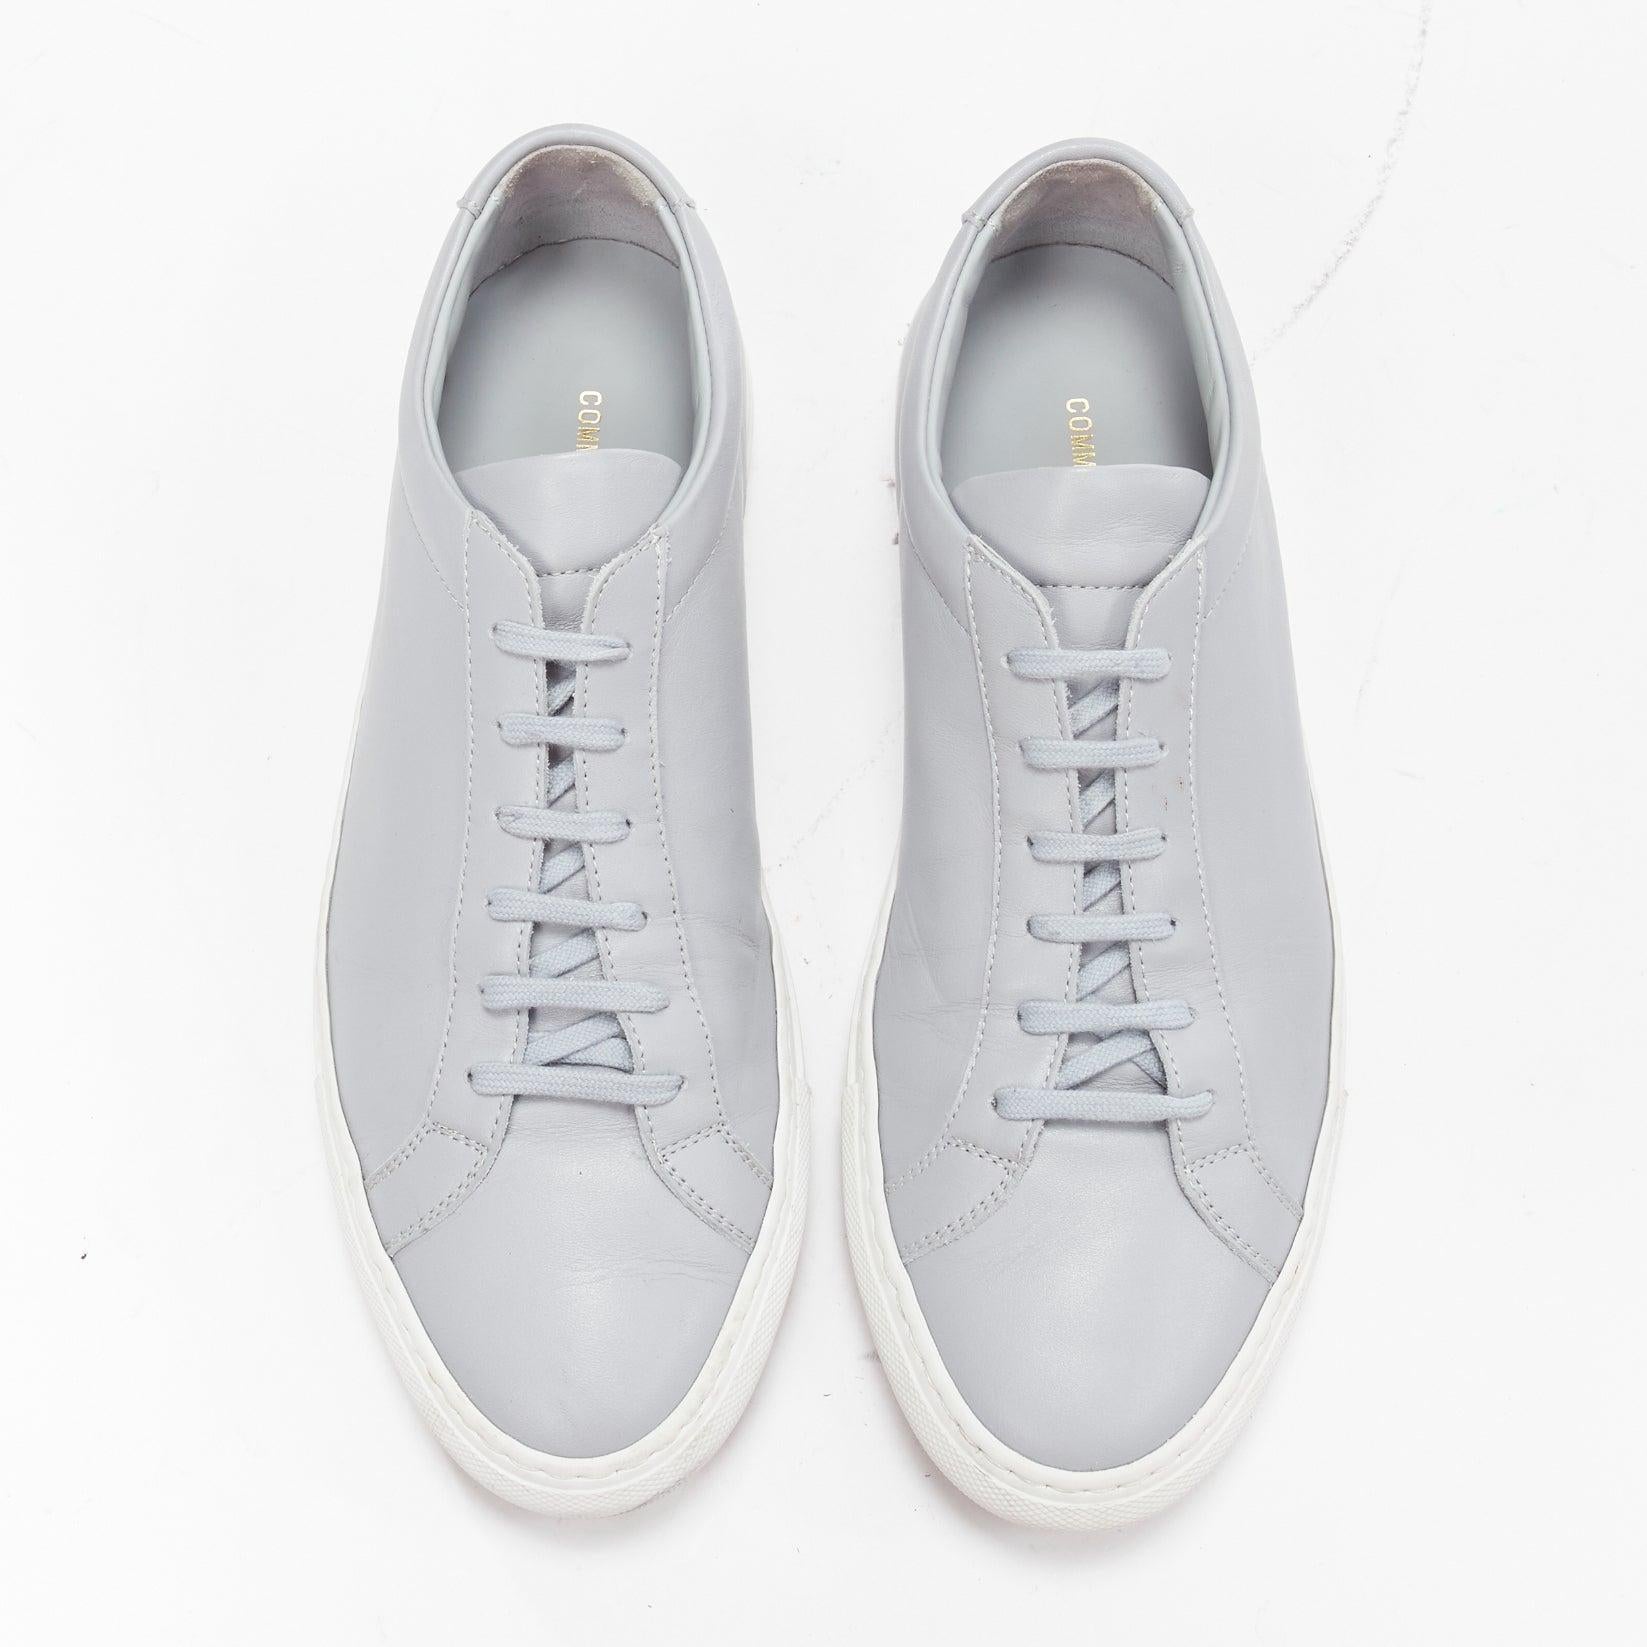 COMMON PROJECT Achilles grey leather gold foil lettering low sneakers EU42
Reference: JSLE/A00084
Brand: Common Project
Model: Achilles
Material: Leather
Color: Grey
Pattern: Solid
Closure: Lace Up
Lining: Grey Leather

CONDITION:
Condition: Good,